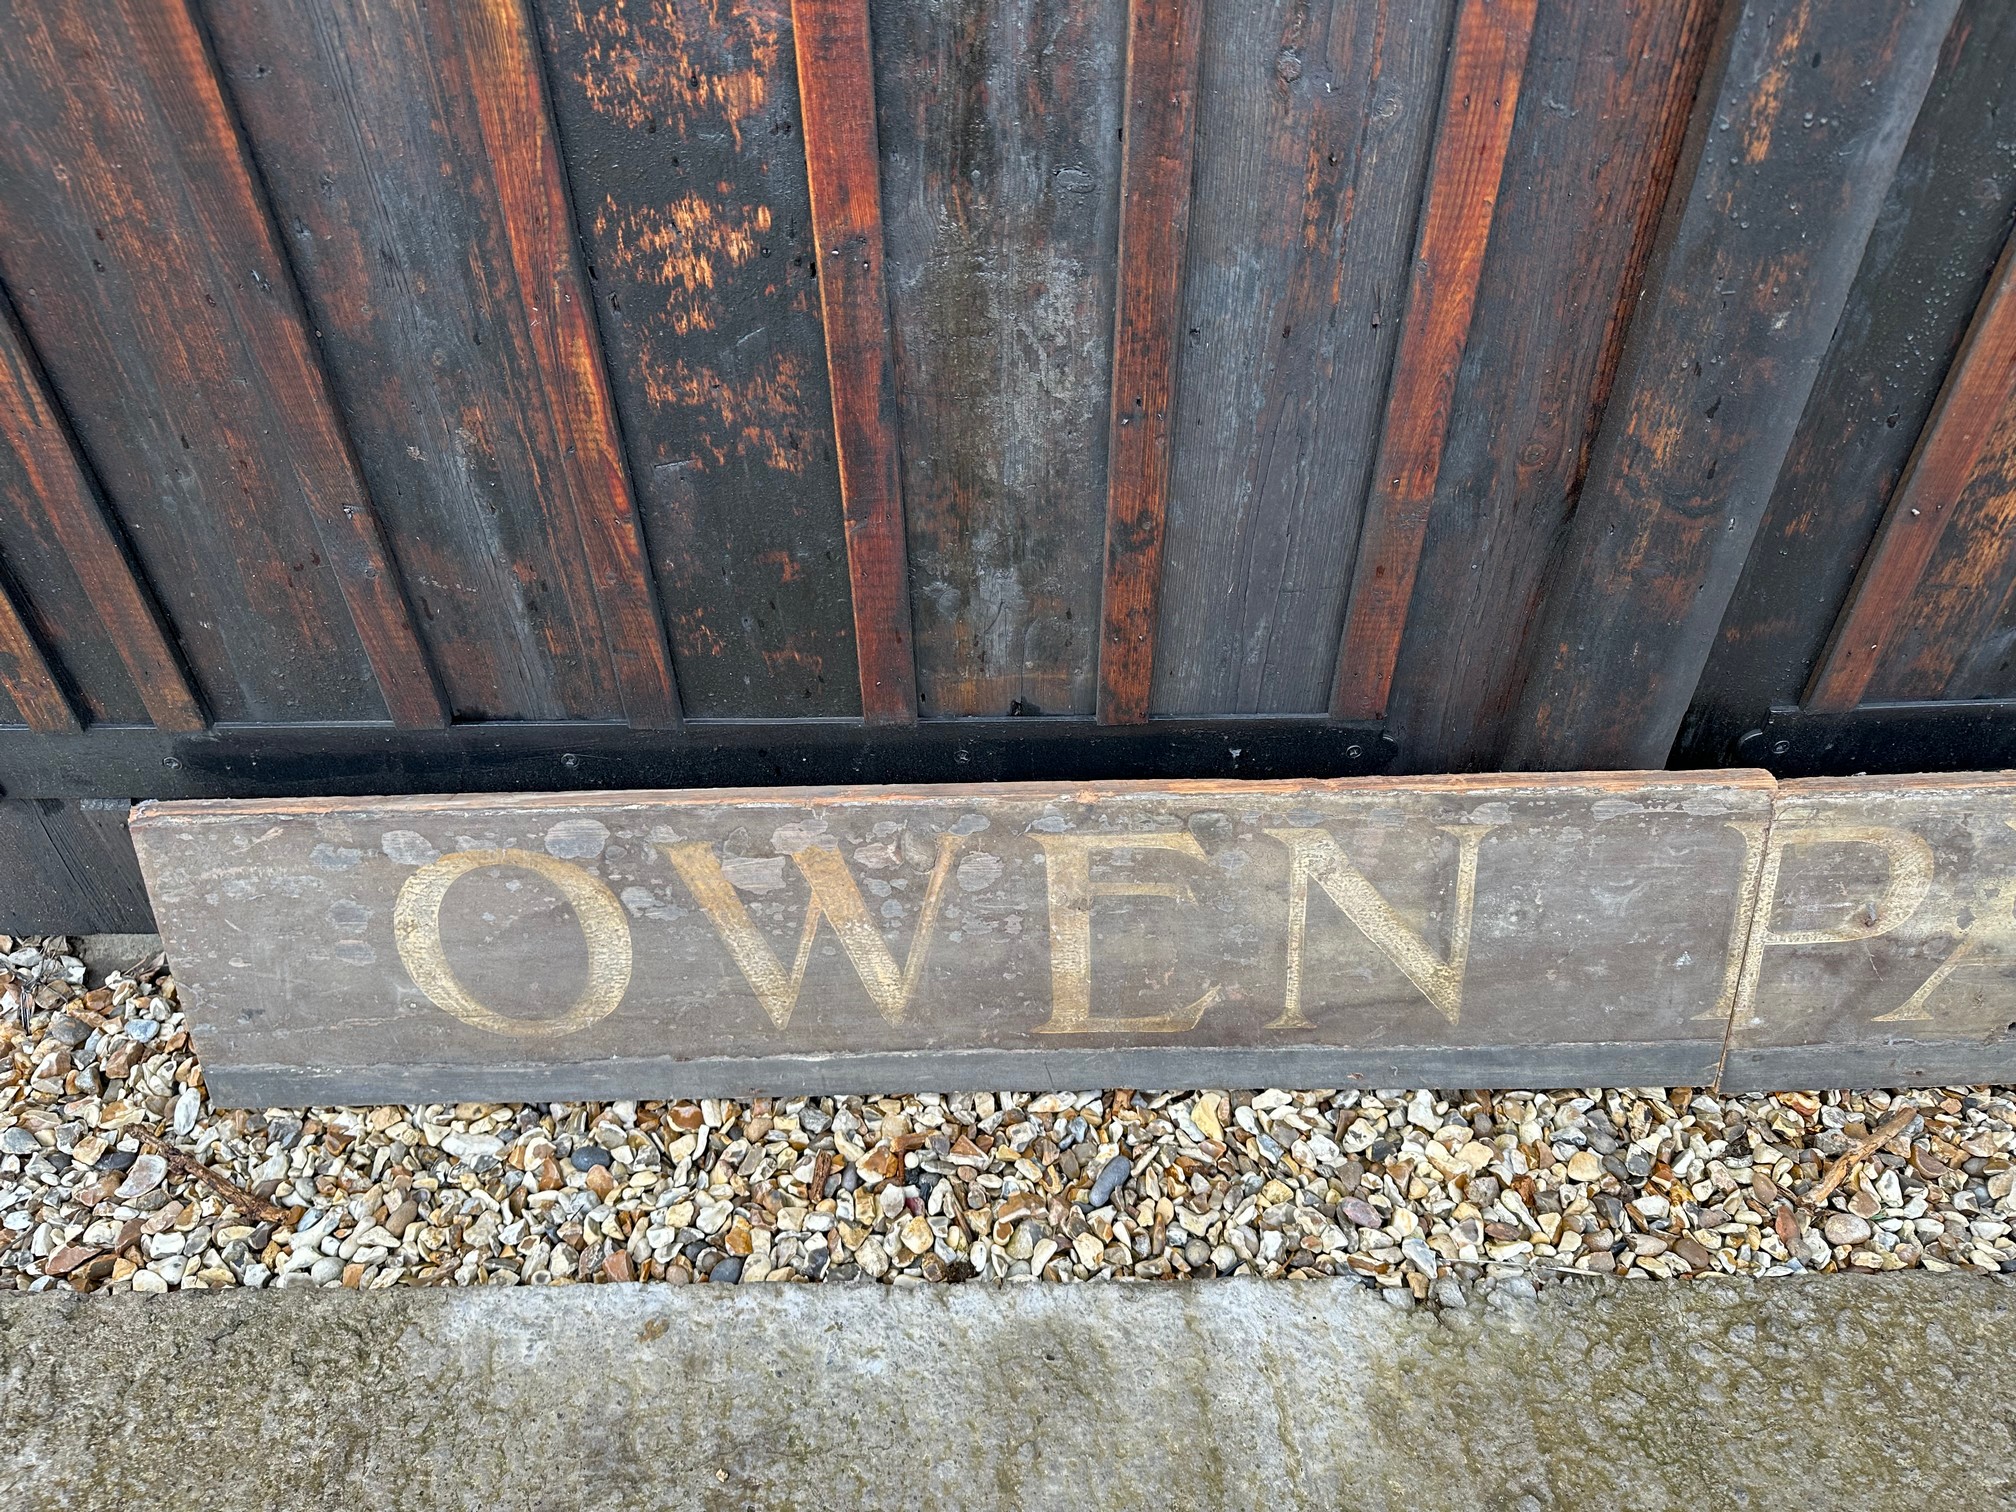 Two parts of a wooden hand painted Welsh advertising sign 'Owen Parry', 48 x 10 1/2" each. - Image 2 of 3